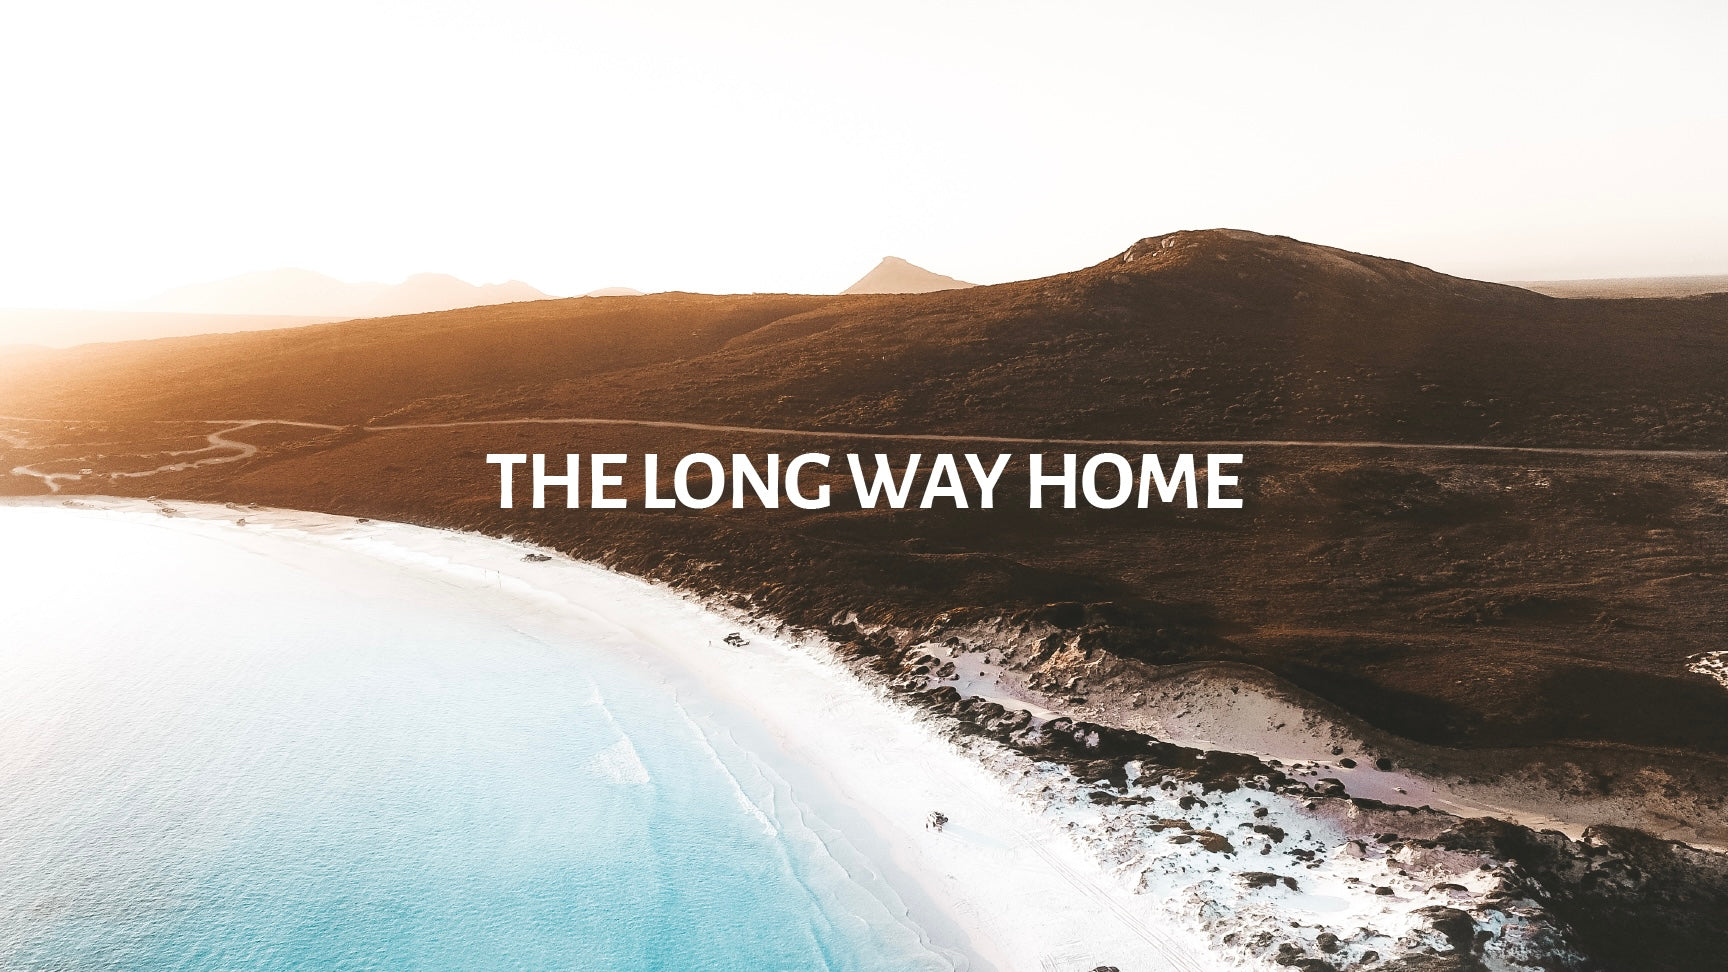 Load video: The Long Way Home